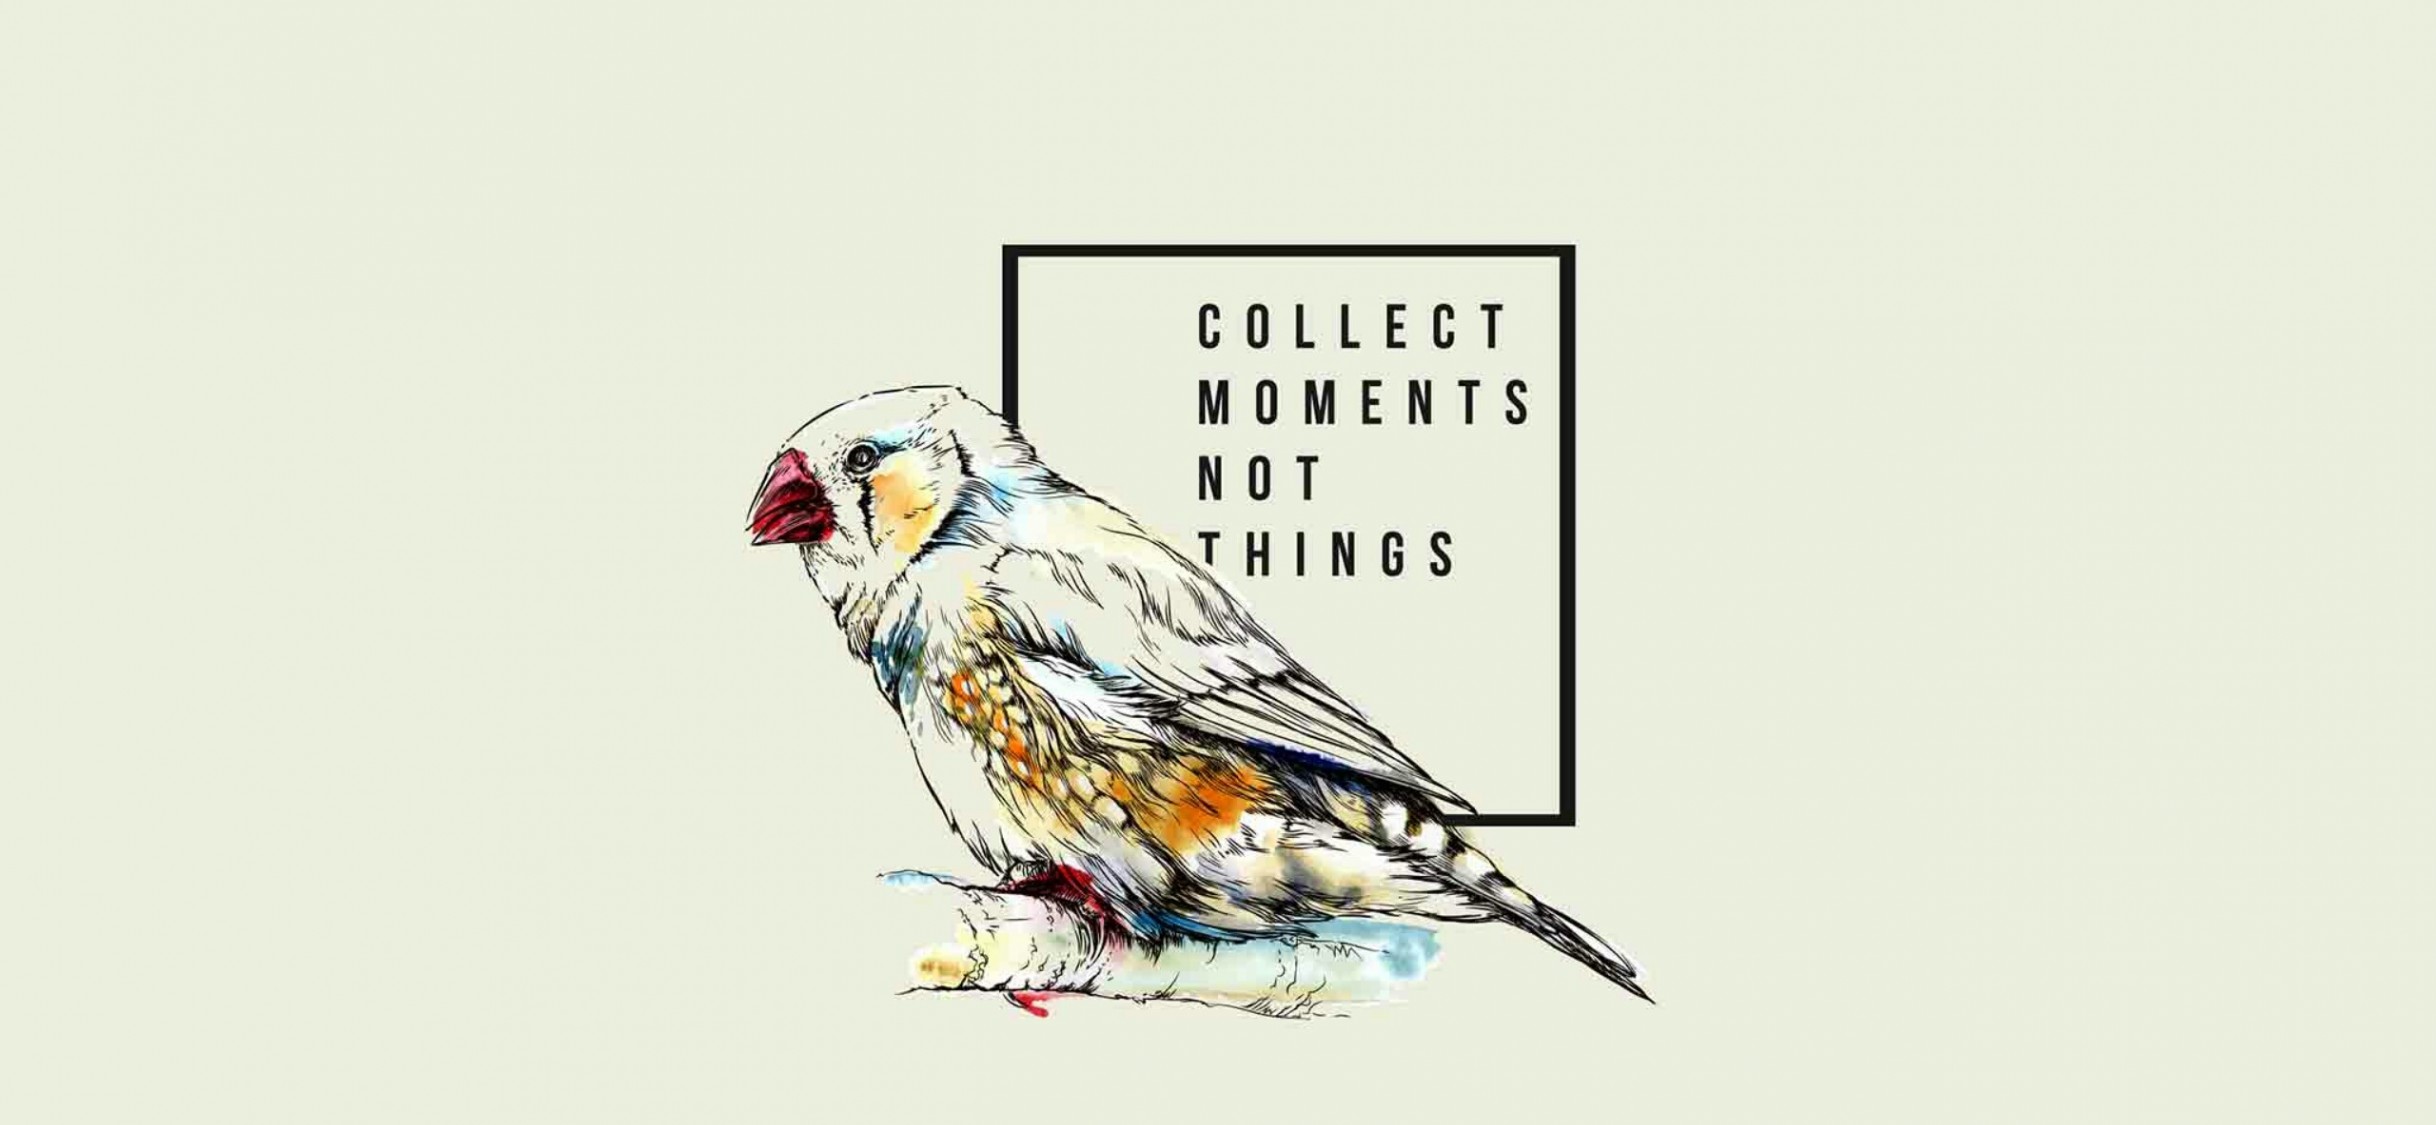 Free Collect Moments Not Things Full Hd Wallpaper for Desktop and Mobiles